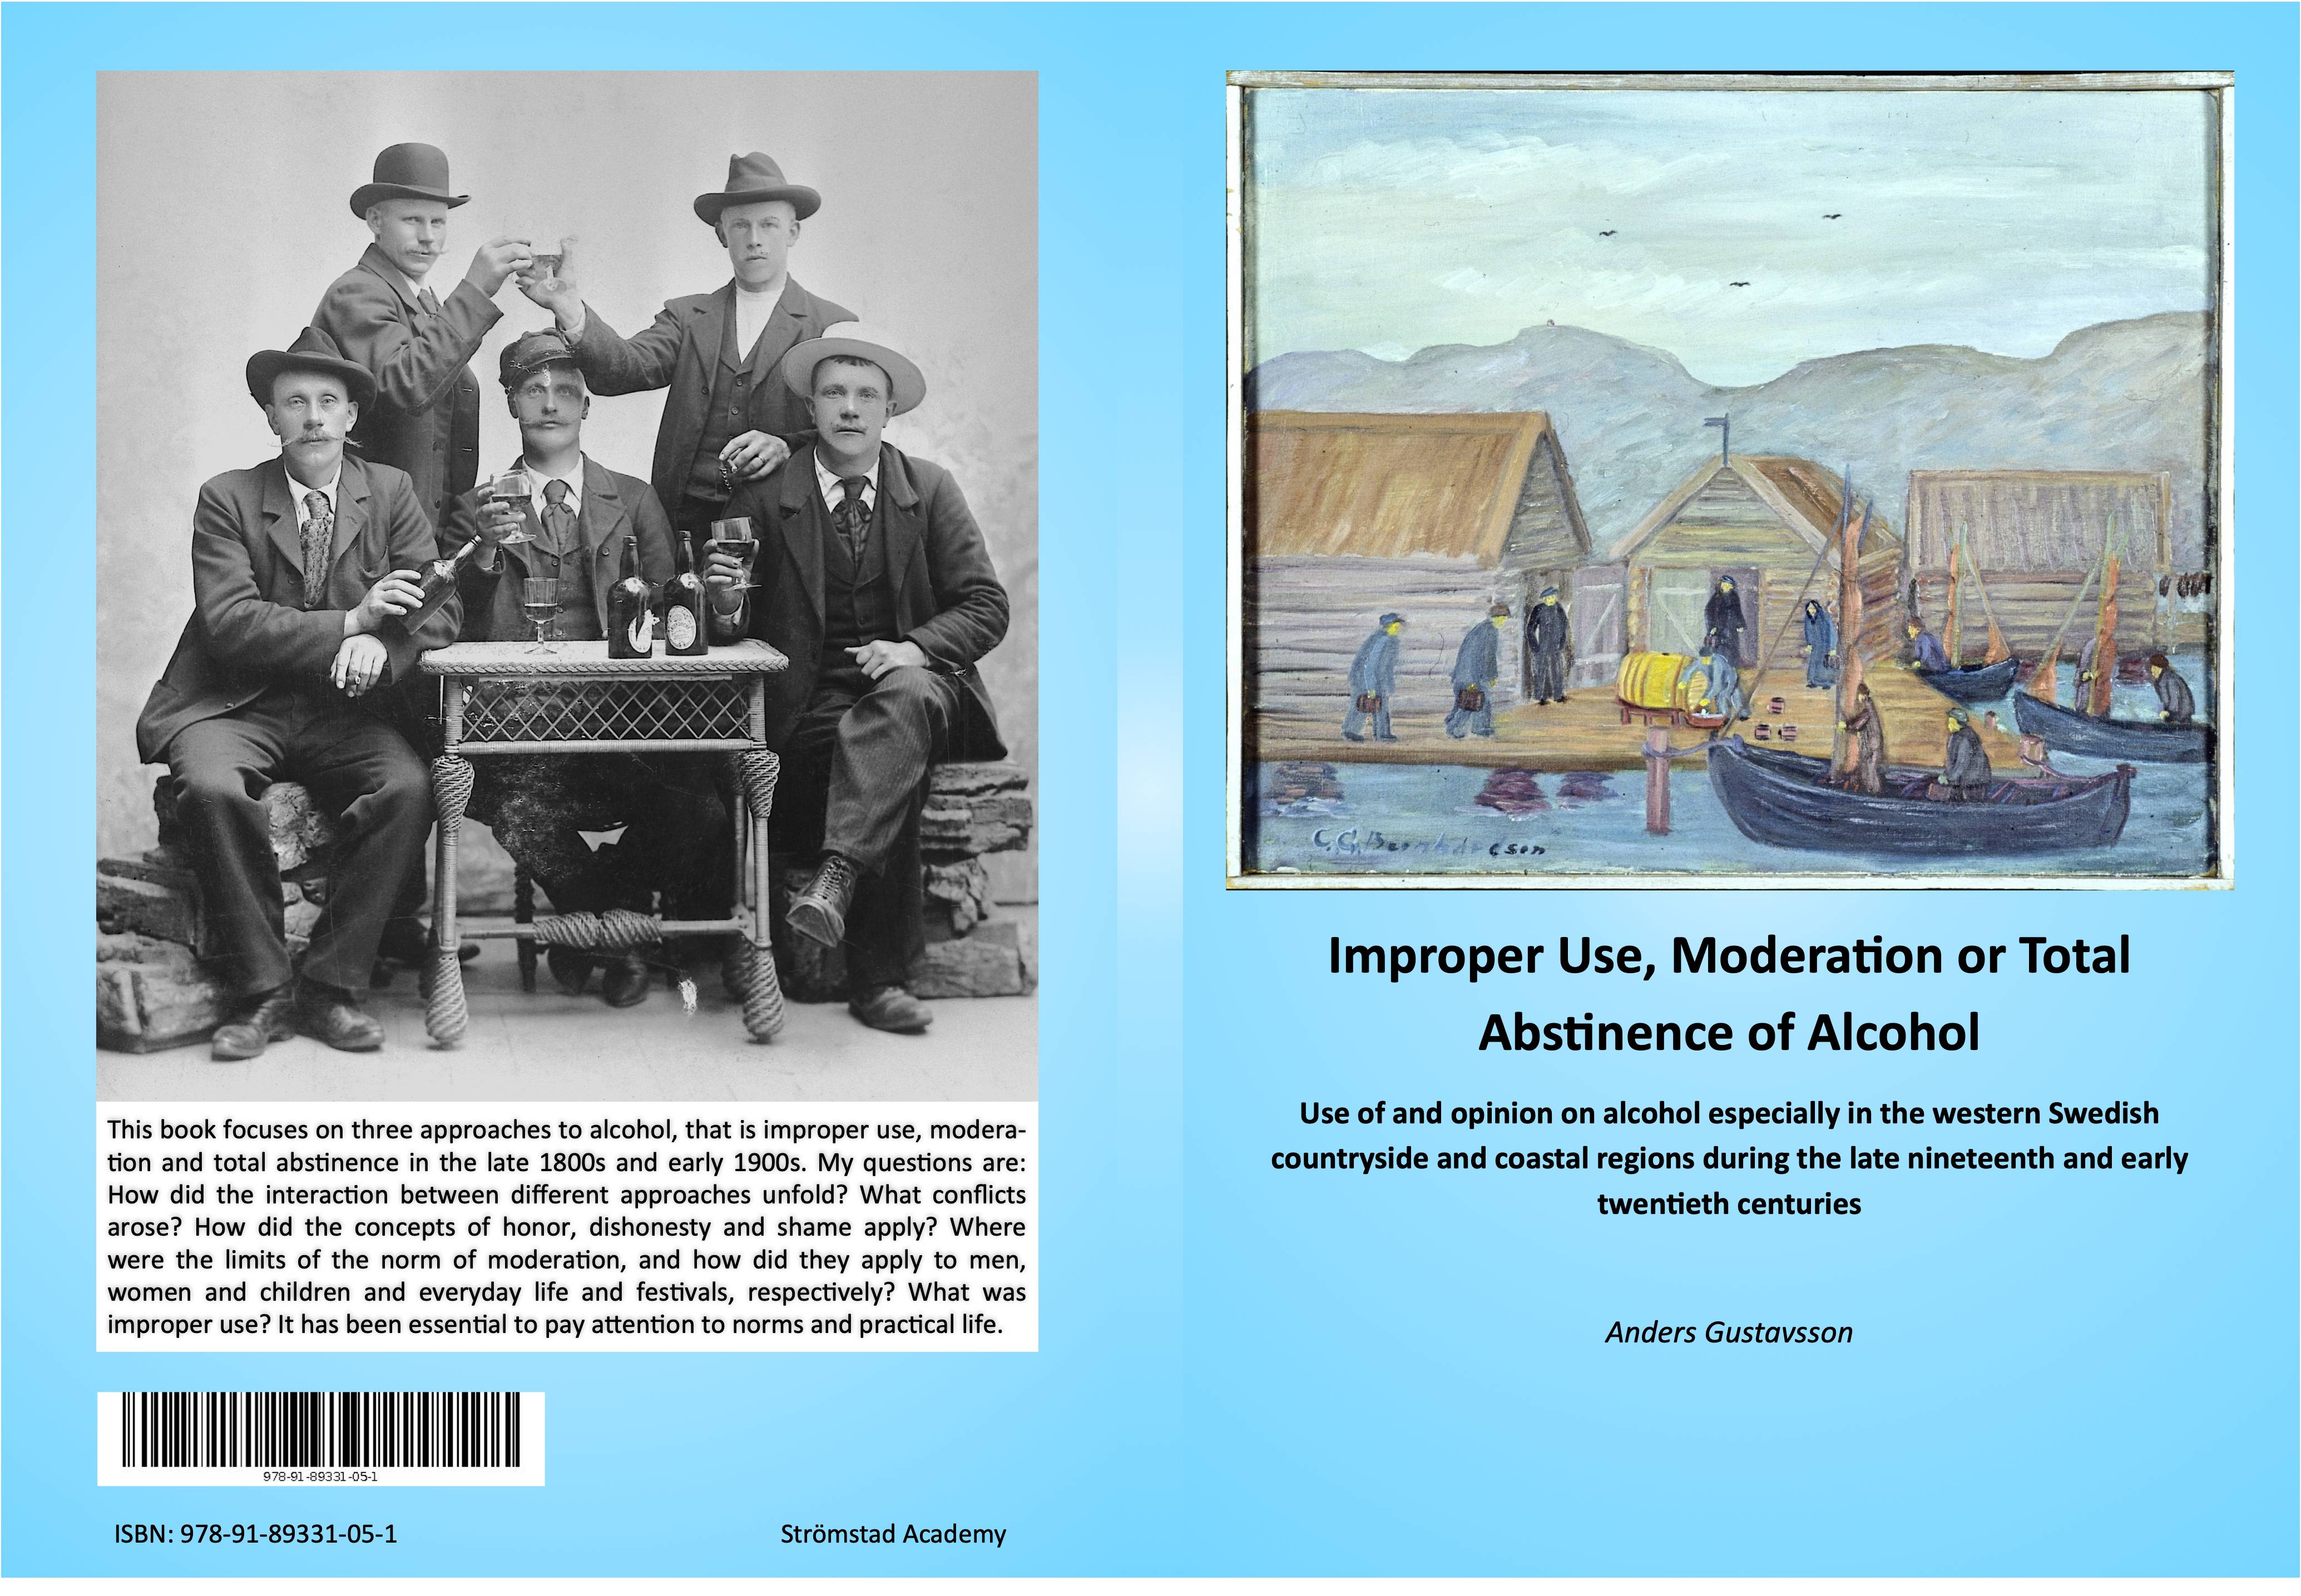 Improper use, moderation or total abstinence of alcohol : use of and opinion on alcohol especially in the western Swedish countryside and coastal regions during the late nineteenth and early twentieth centuries